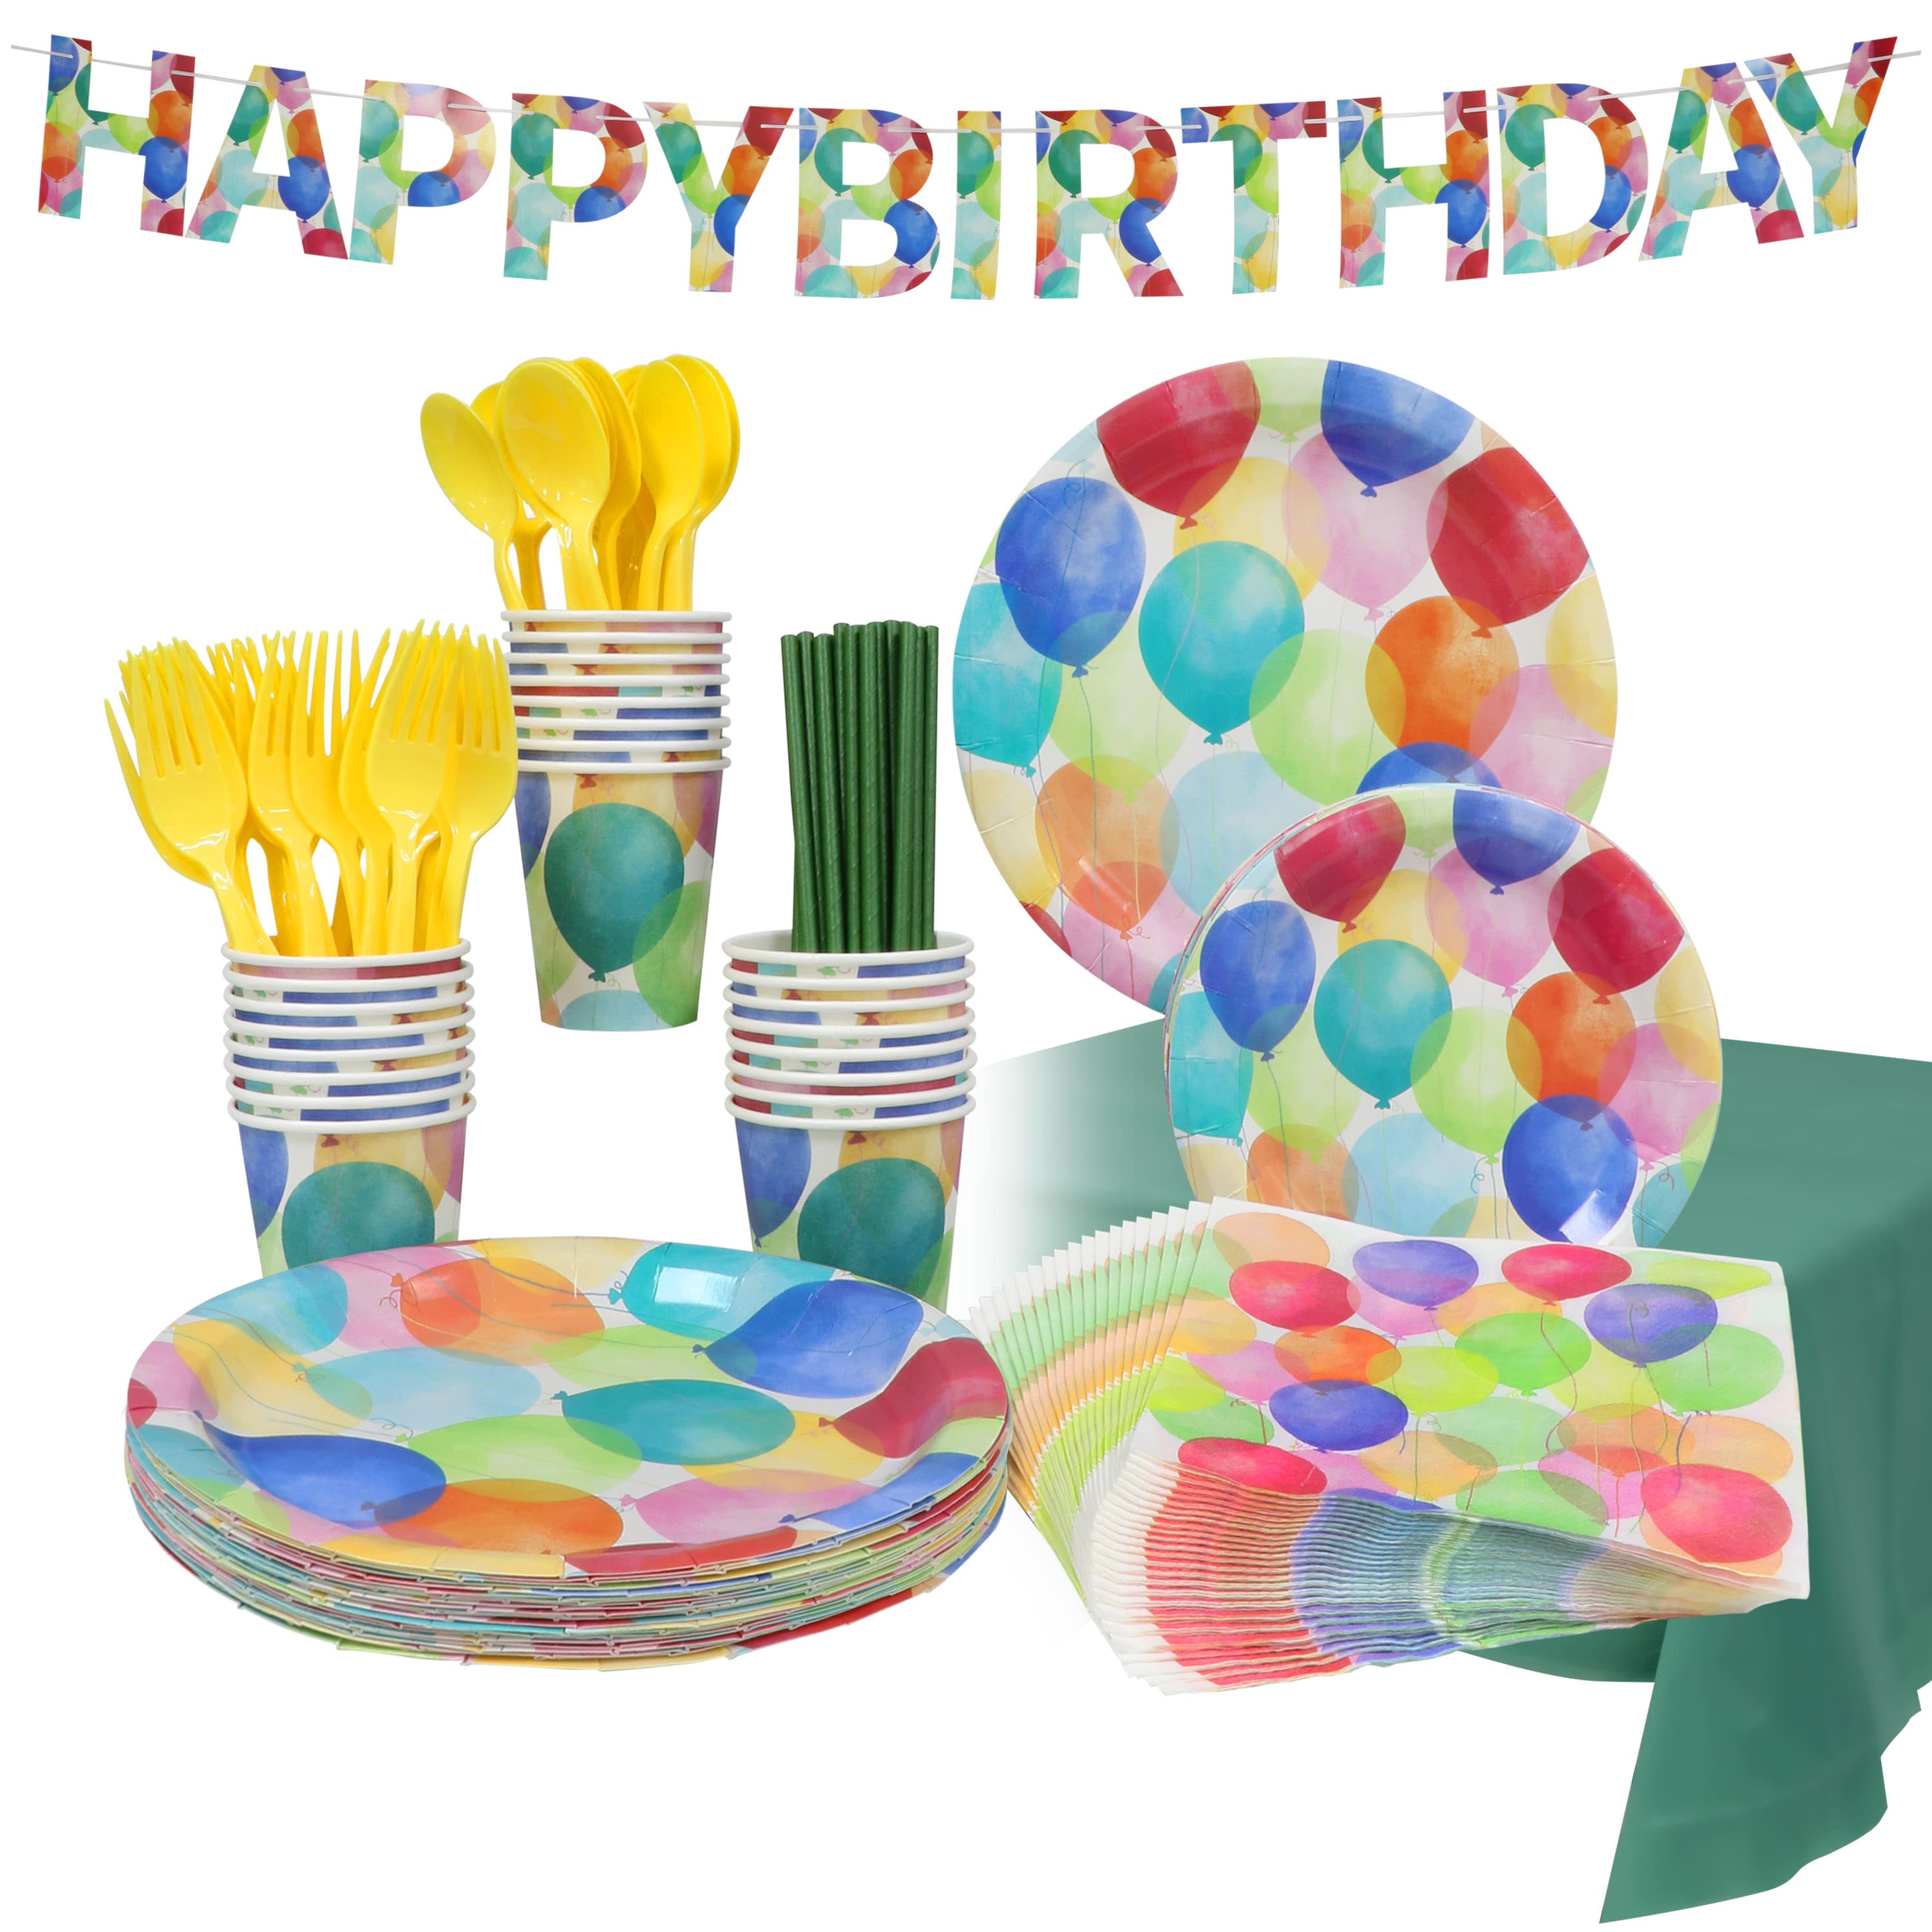 94 Piece Girls Rainbow Birthday Party Decorations Set with Balloons,  Banner, Cake Toppers and Wall Cutouts